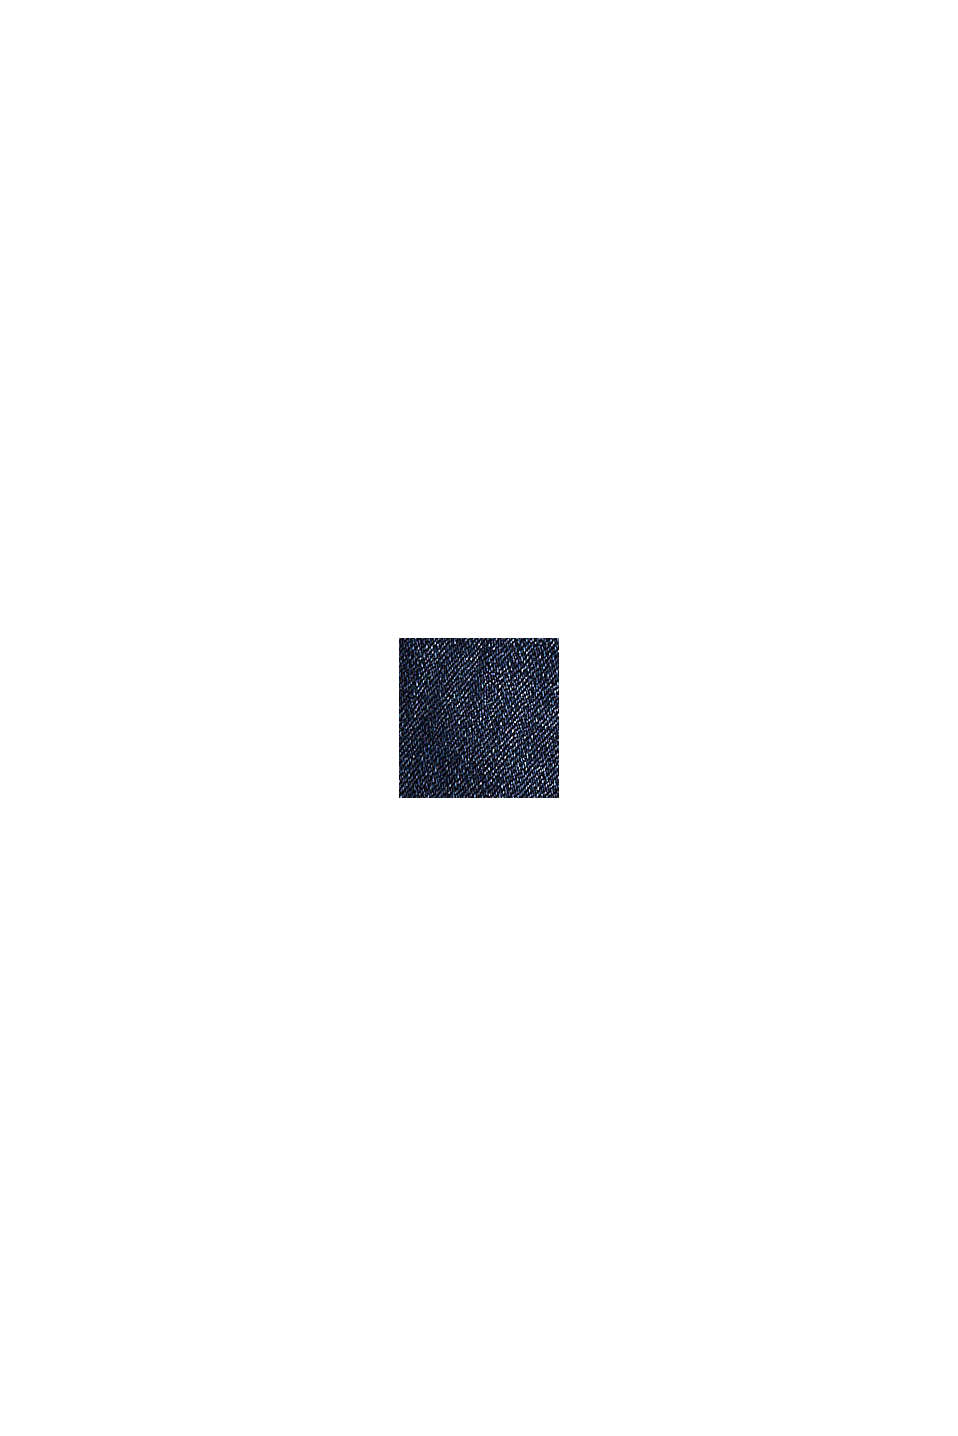 Stretch jeans made of blended organic cotton, BLUE BLACK, swatch